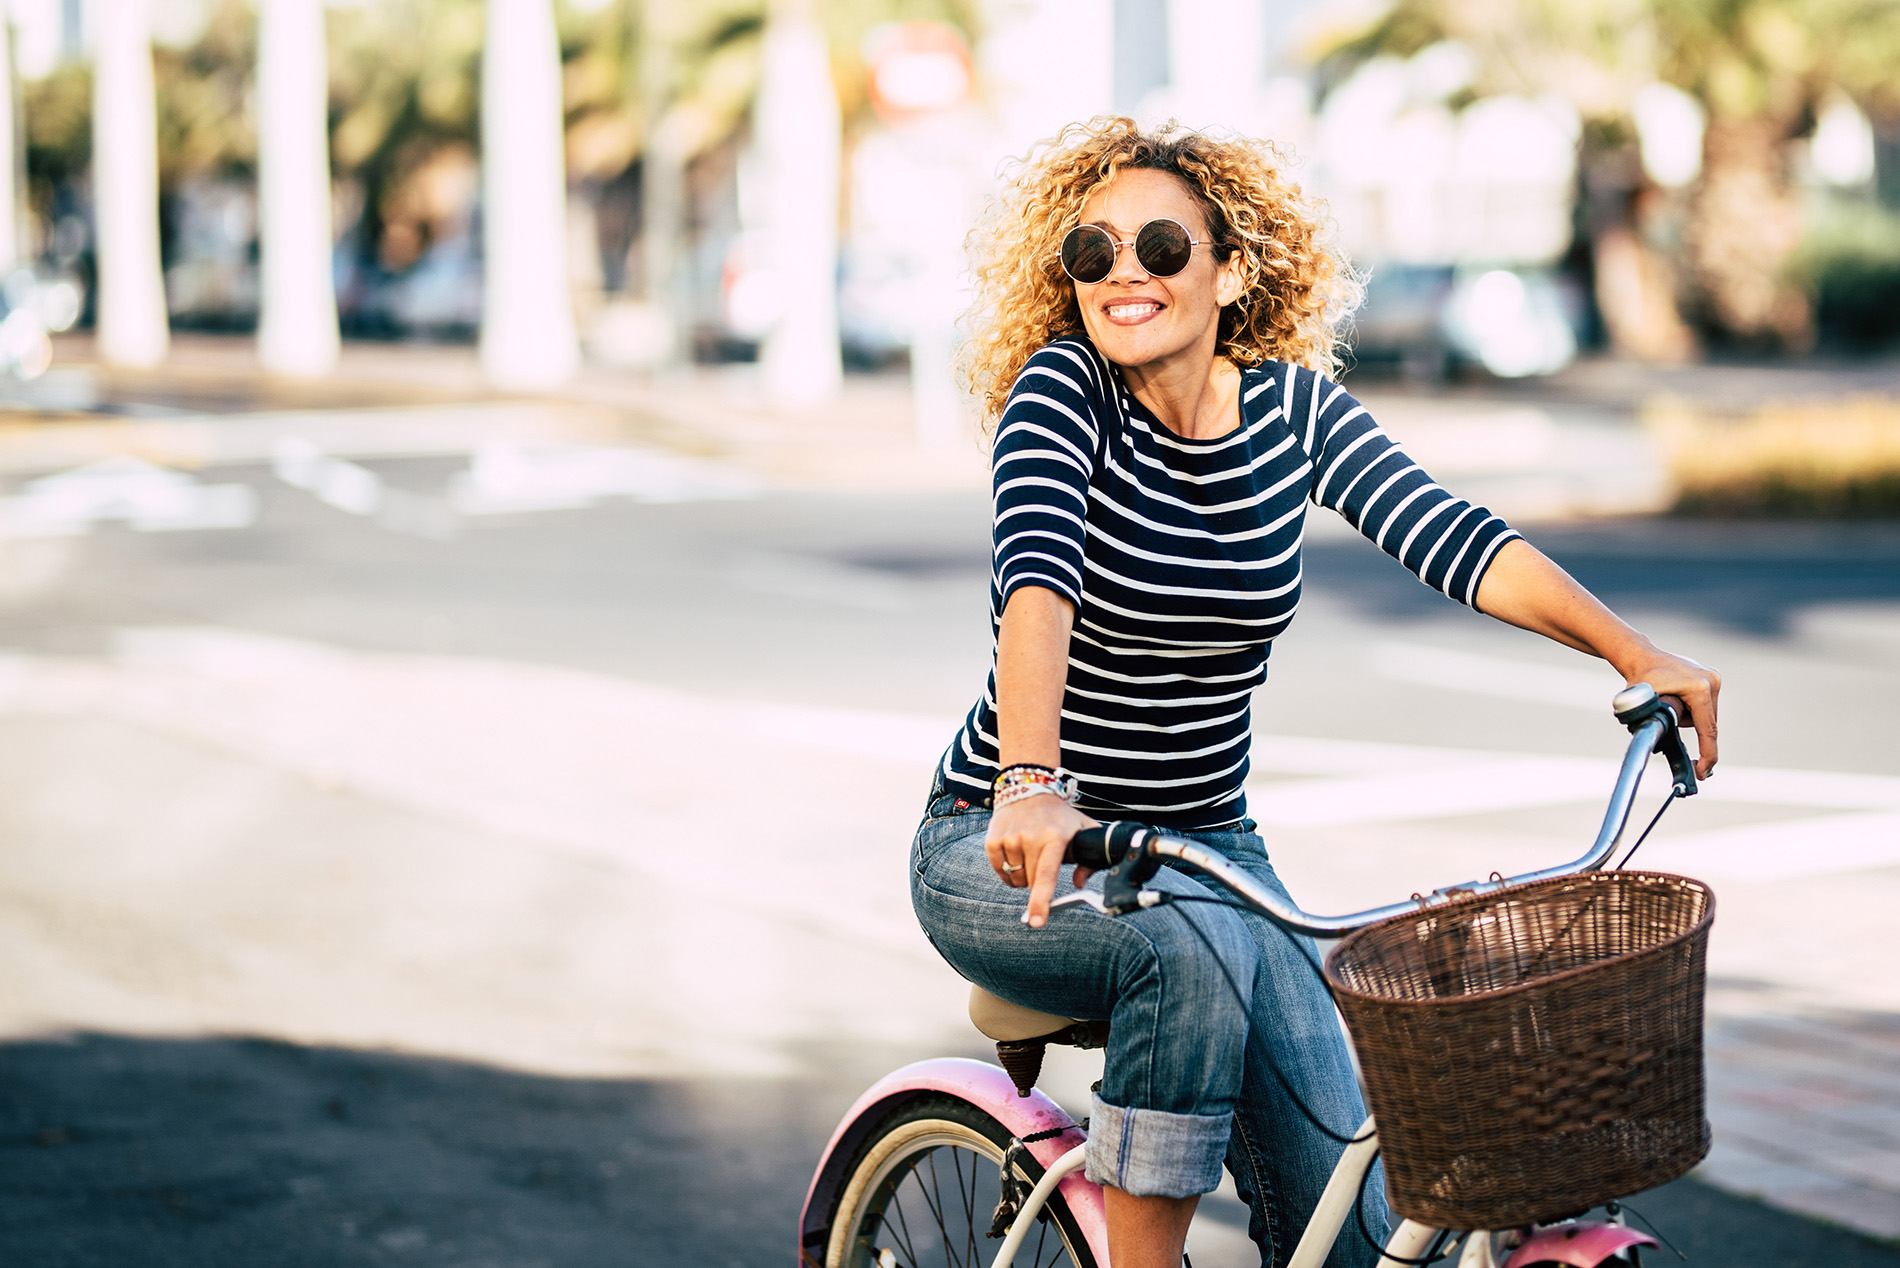 Smiling middle aged woman riding a bicycle